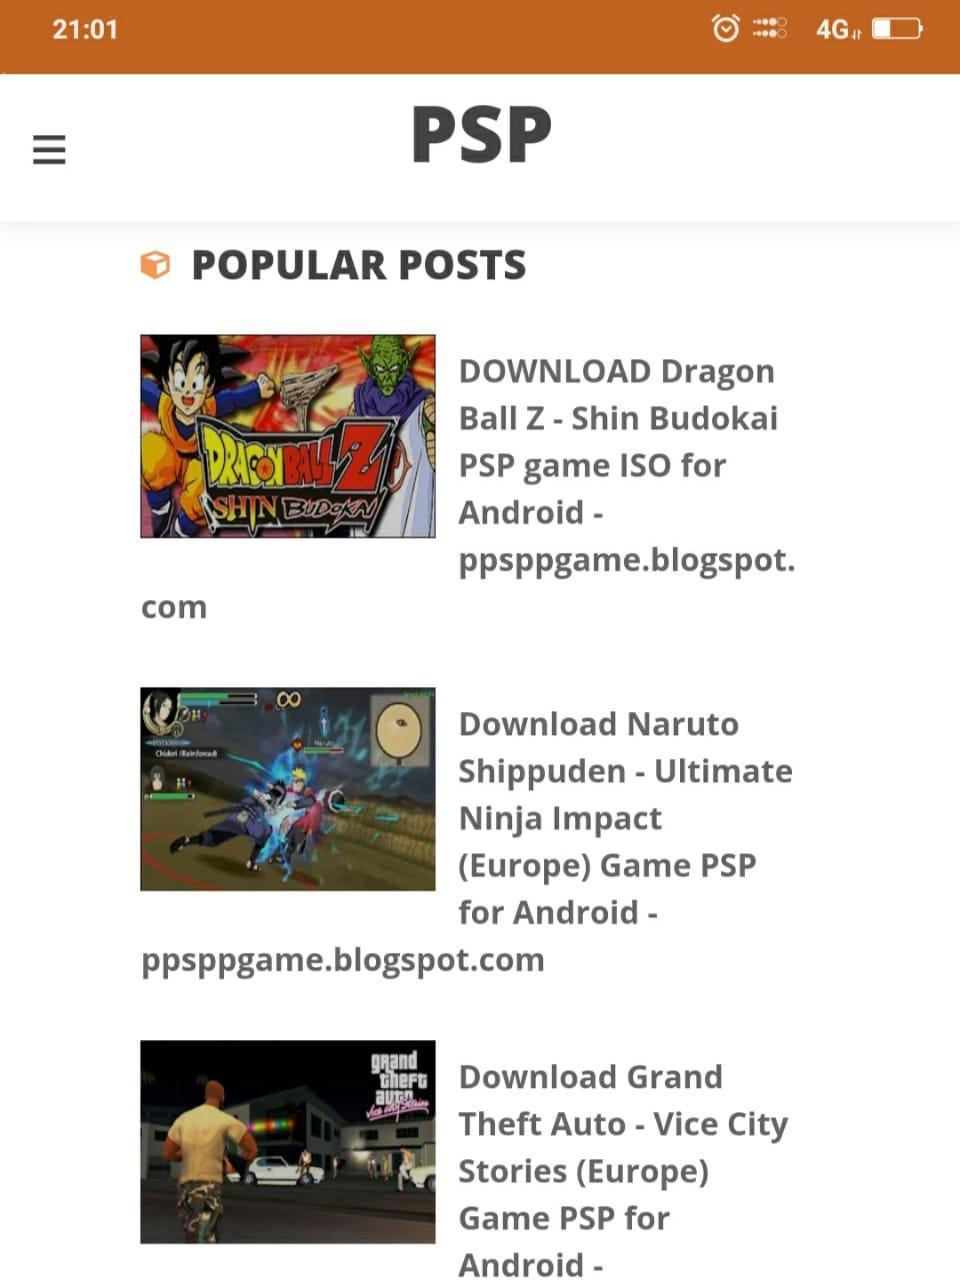 Download All Psp Games And Ppsspp Emulators For Android Apk Download